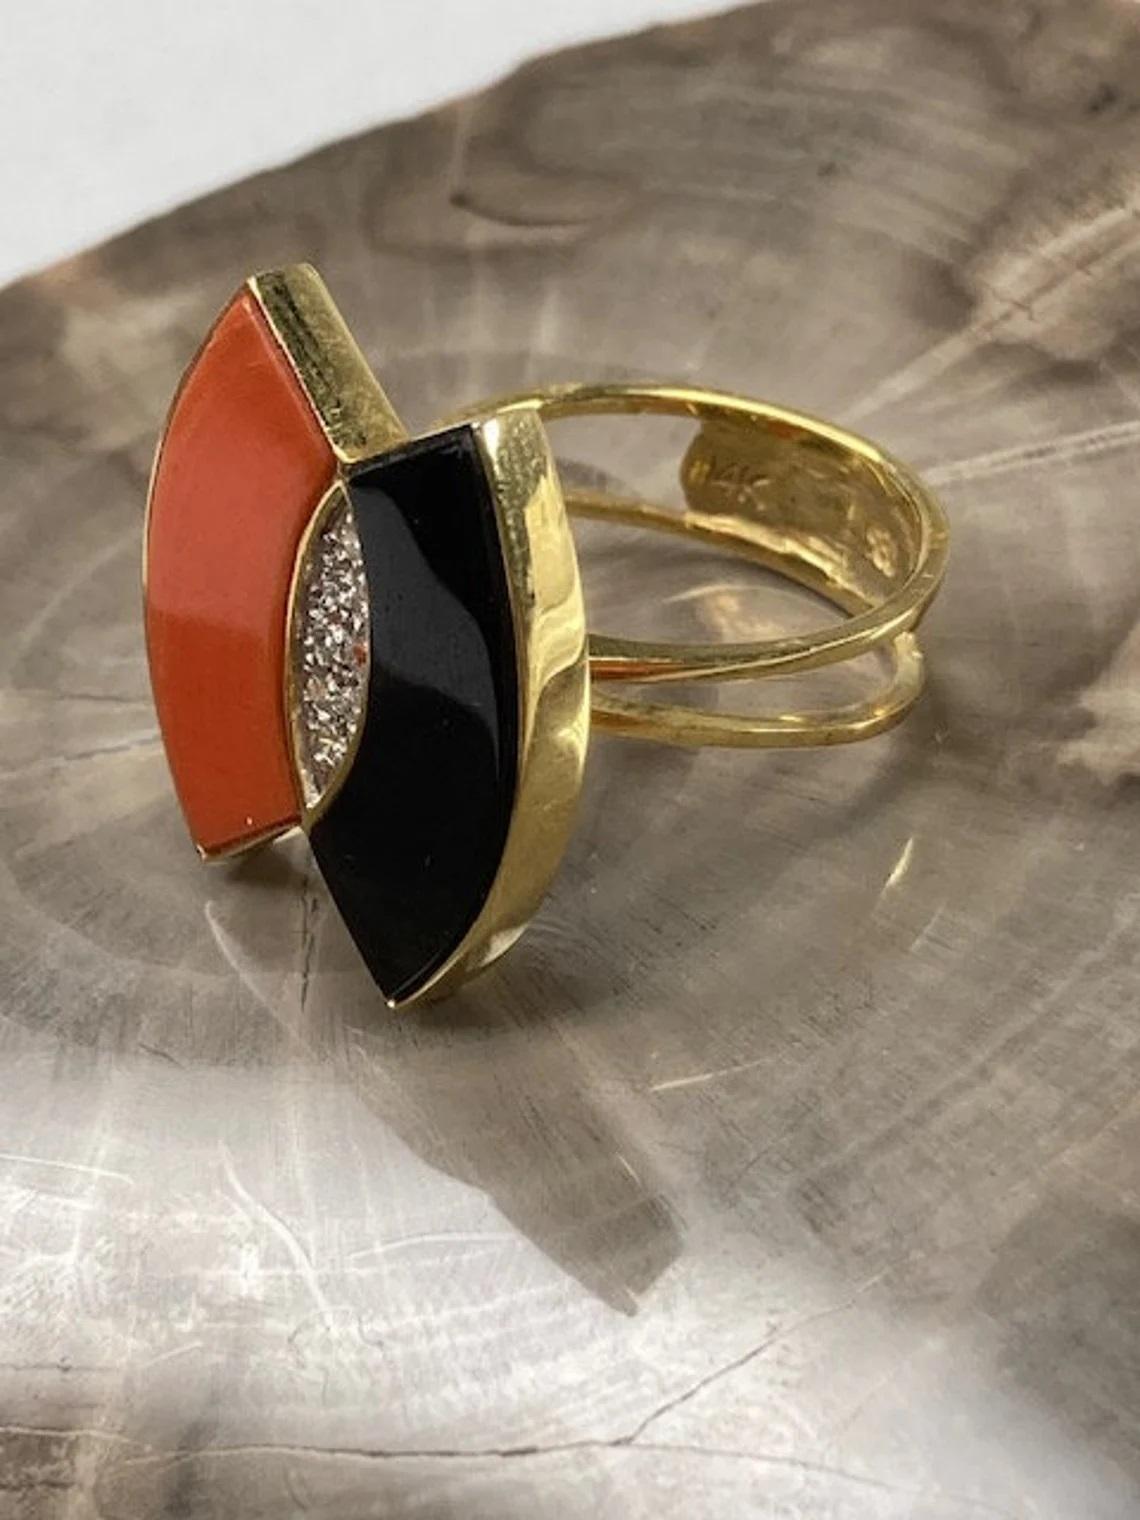 Vintage 14k Gold Coral & Onyx Ring with Diamond Accent, One-of-a-kind

This vintage ring truly is the perfect statement piece, with its unique coral and onyx beams, cocooning a cluster of dazzling white diamonds. It was made in the 1980s and